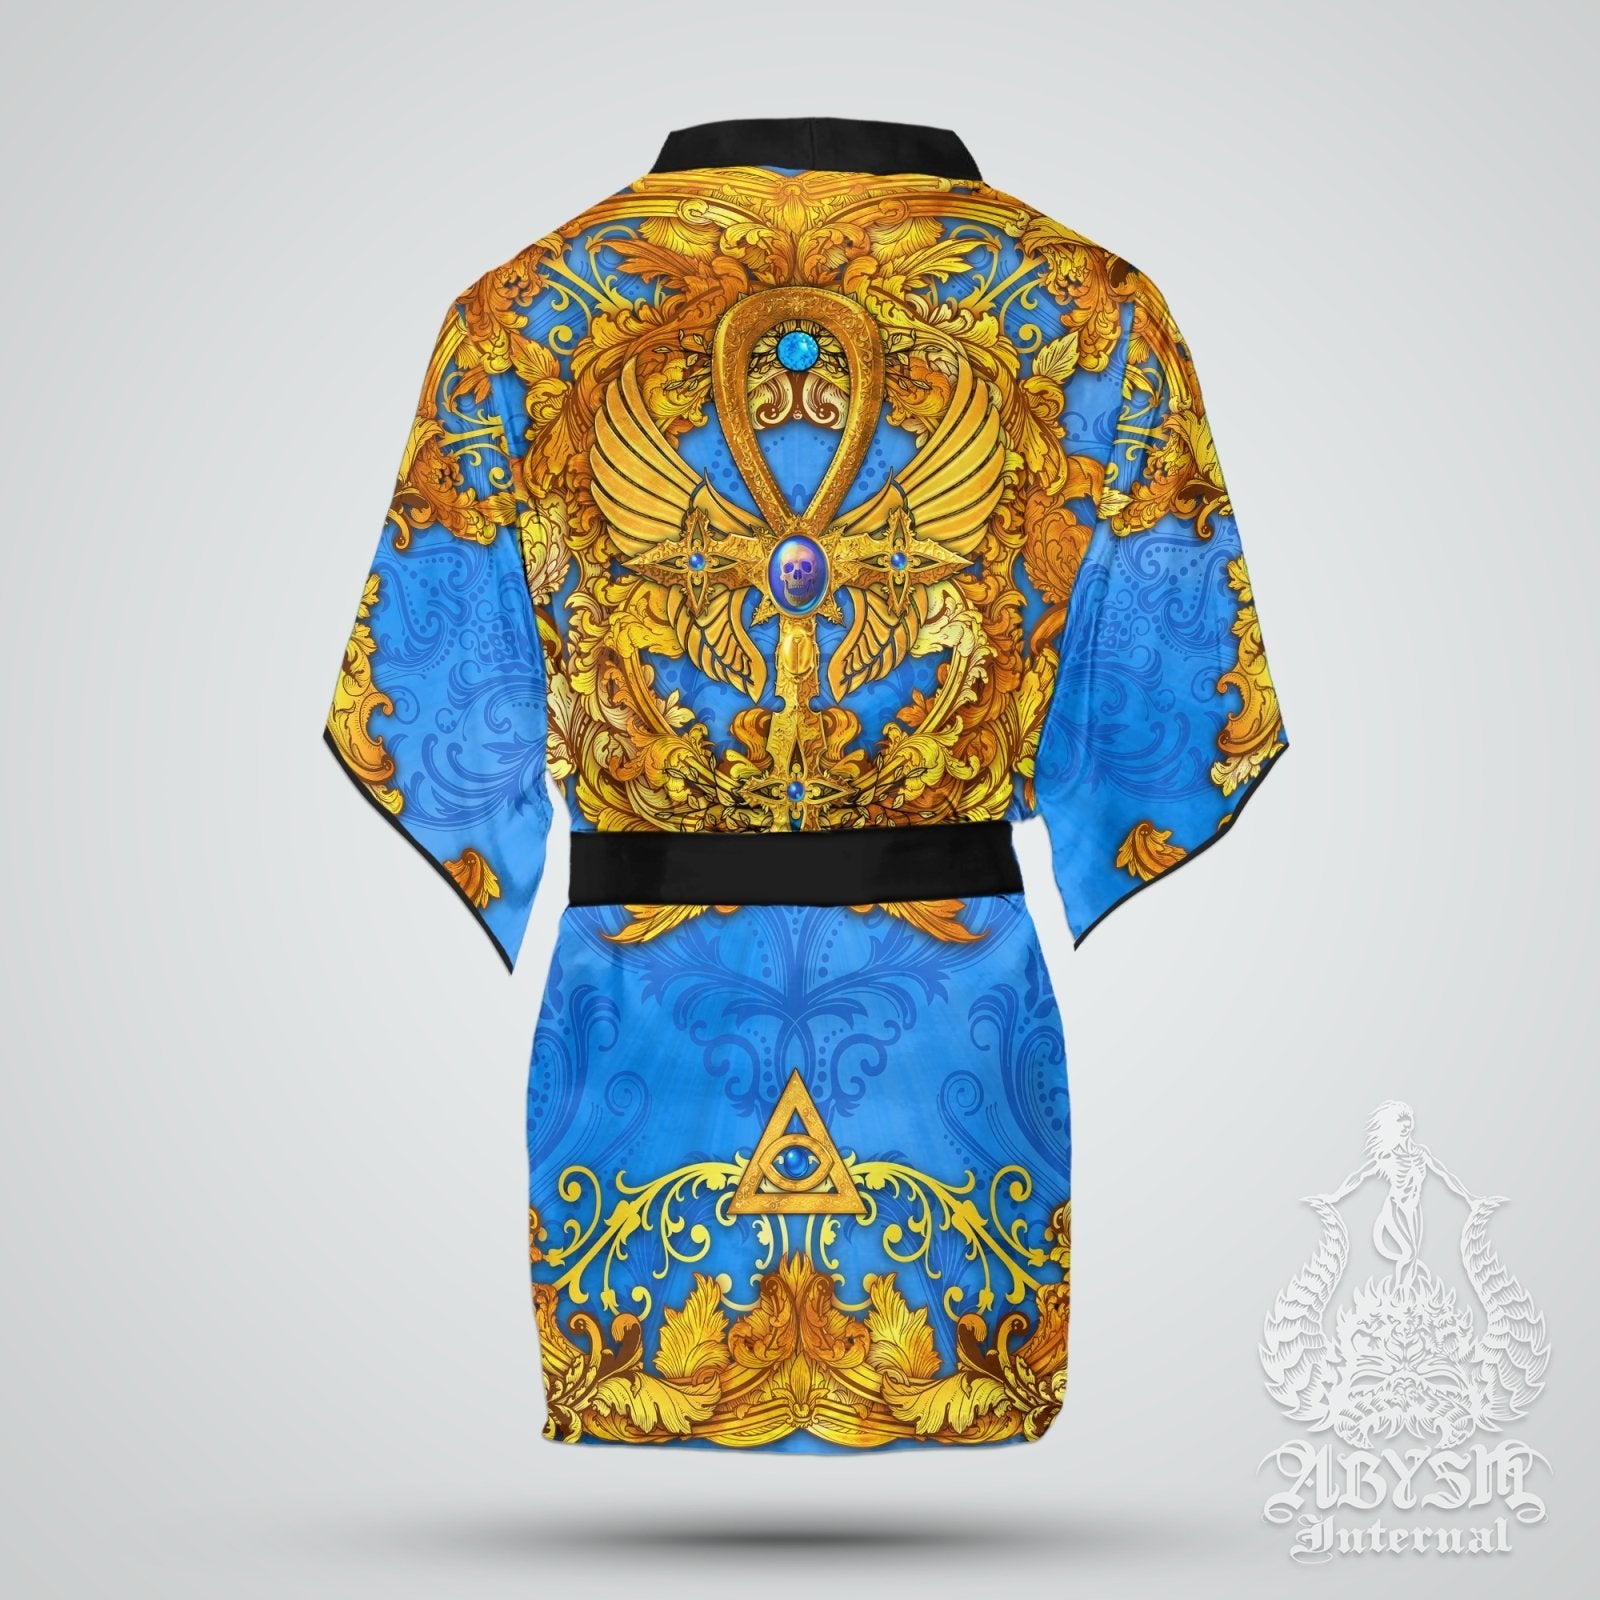 Ankh Cover Up, Beach Outfit, Party Kimono, Occult Summer Festival Robe, Indie and Alternative Clothing, Unisex - Cyan Gold - Abysm Internal